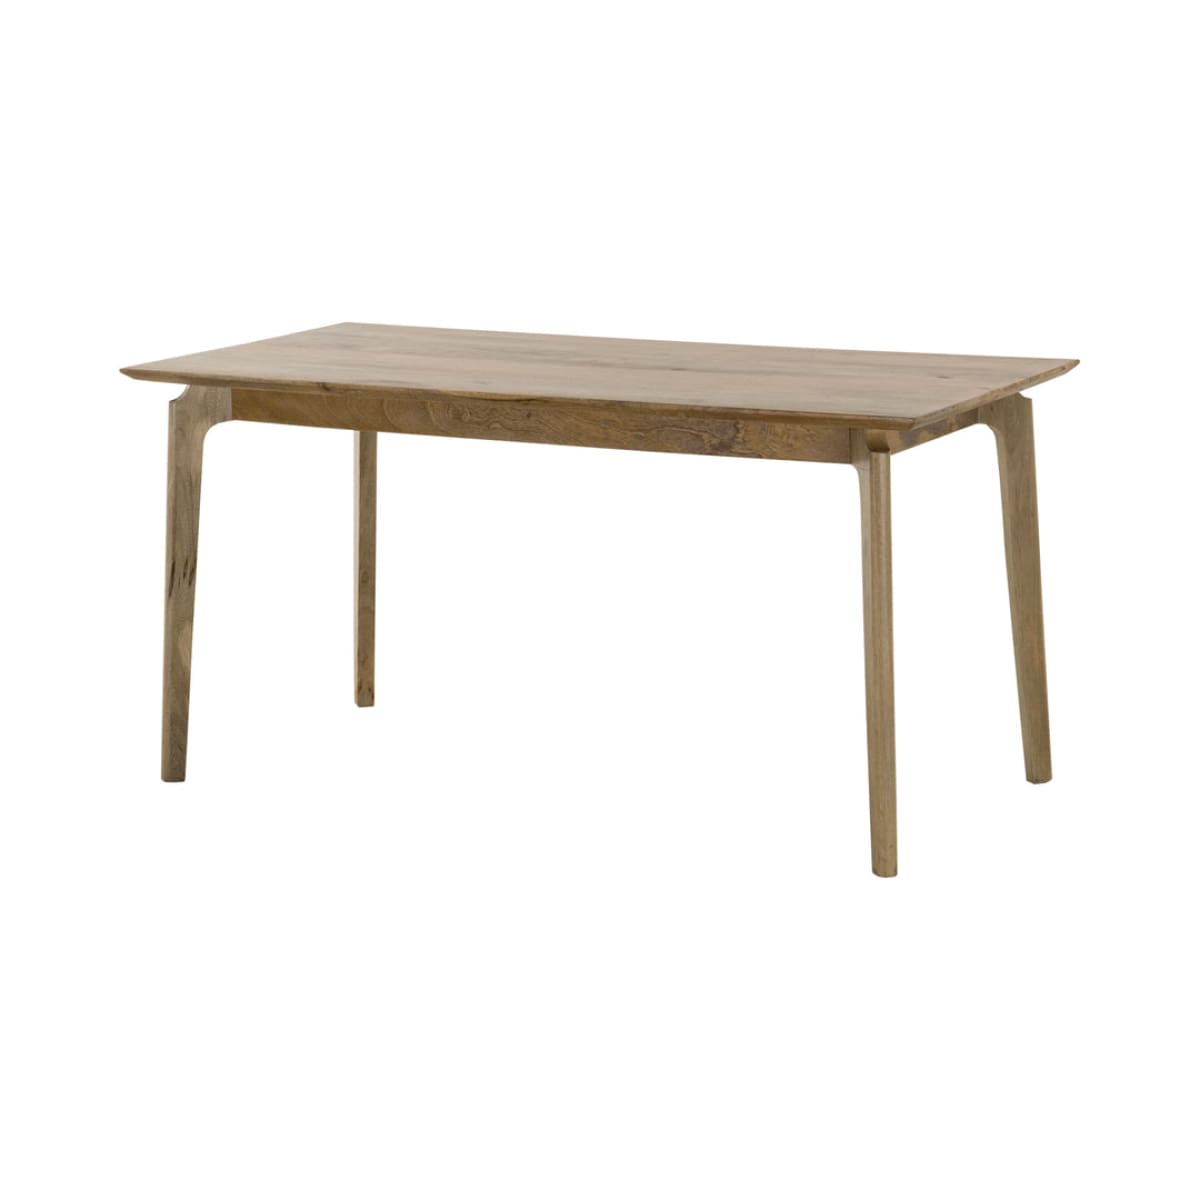 Kenzo Dining Table Small 60” – Natural - lh-import-dining-tables